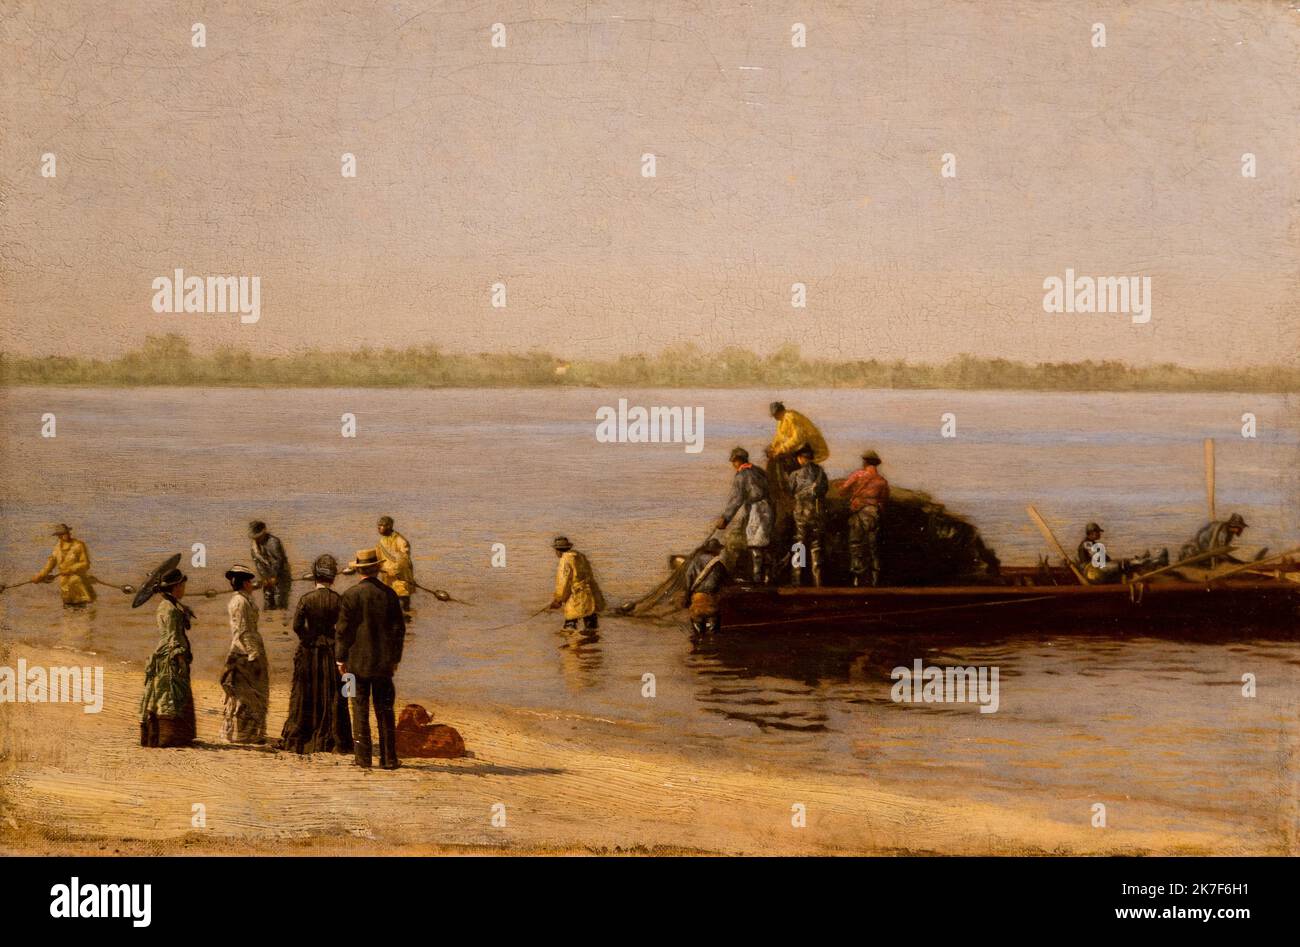 ©Active Museu/MAXPPP - ActiveMuseum 0001536.jpg / Peche a l'alose a Gloucester sur la riviere Delaware, 1881 - Thomas Eakins 1881 - / Thomas Eakins / Peinture Active Museum / Le Pictorium Beach ,Fisherman ,Fishing ,Fishing net ,Glassy sea ,Horizontal ,Oar ,Passer-by ,Realism ,Shad ,Small boat ,America ,Delaware river ,North America ,United States ,19th century ,Thomas Eakins ,Painting ,  Stock Photo